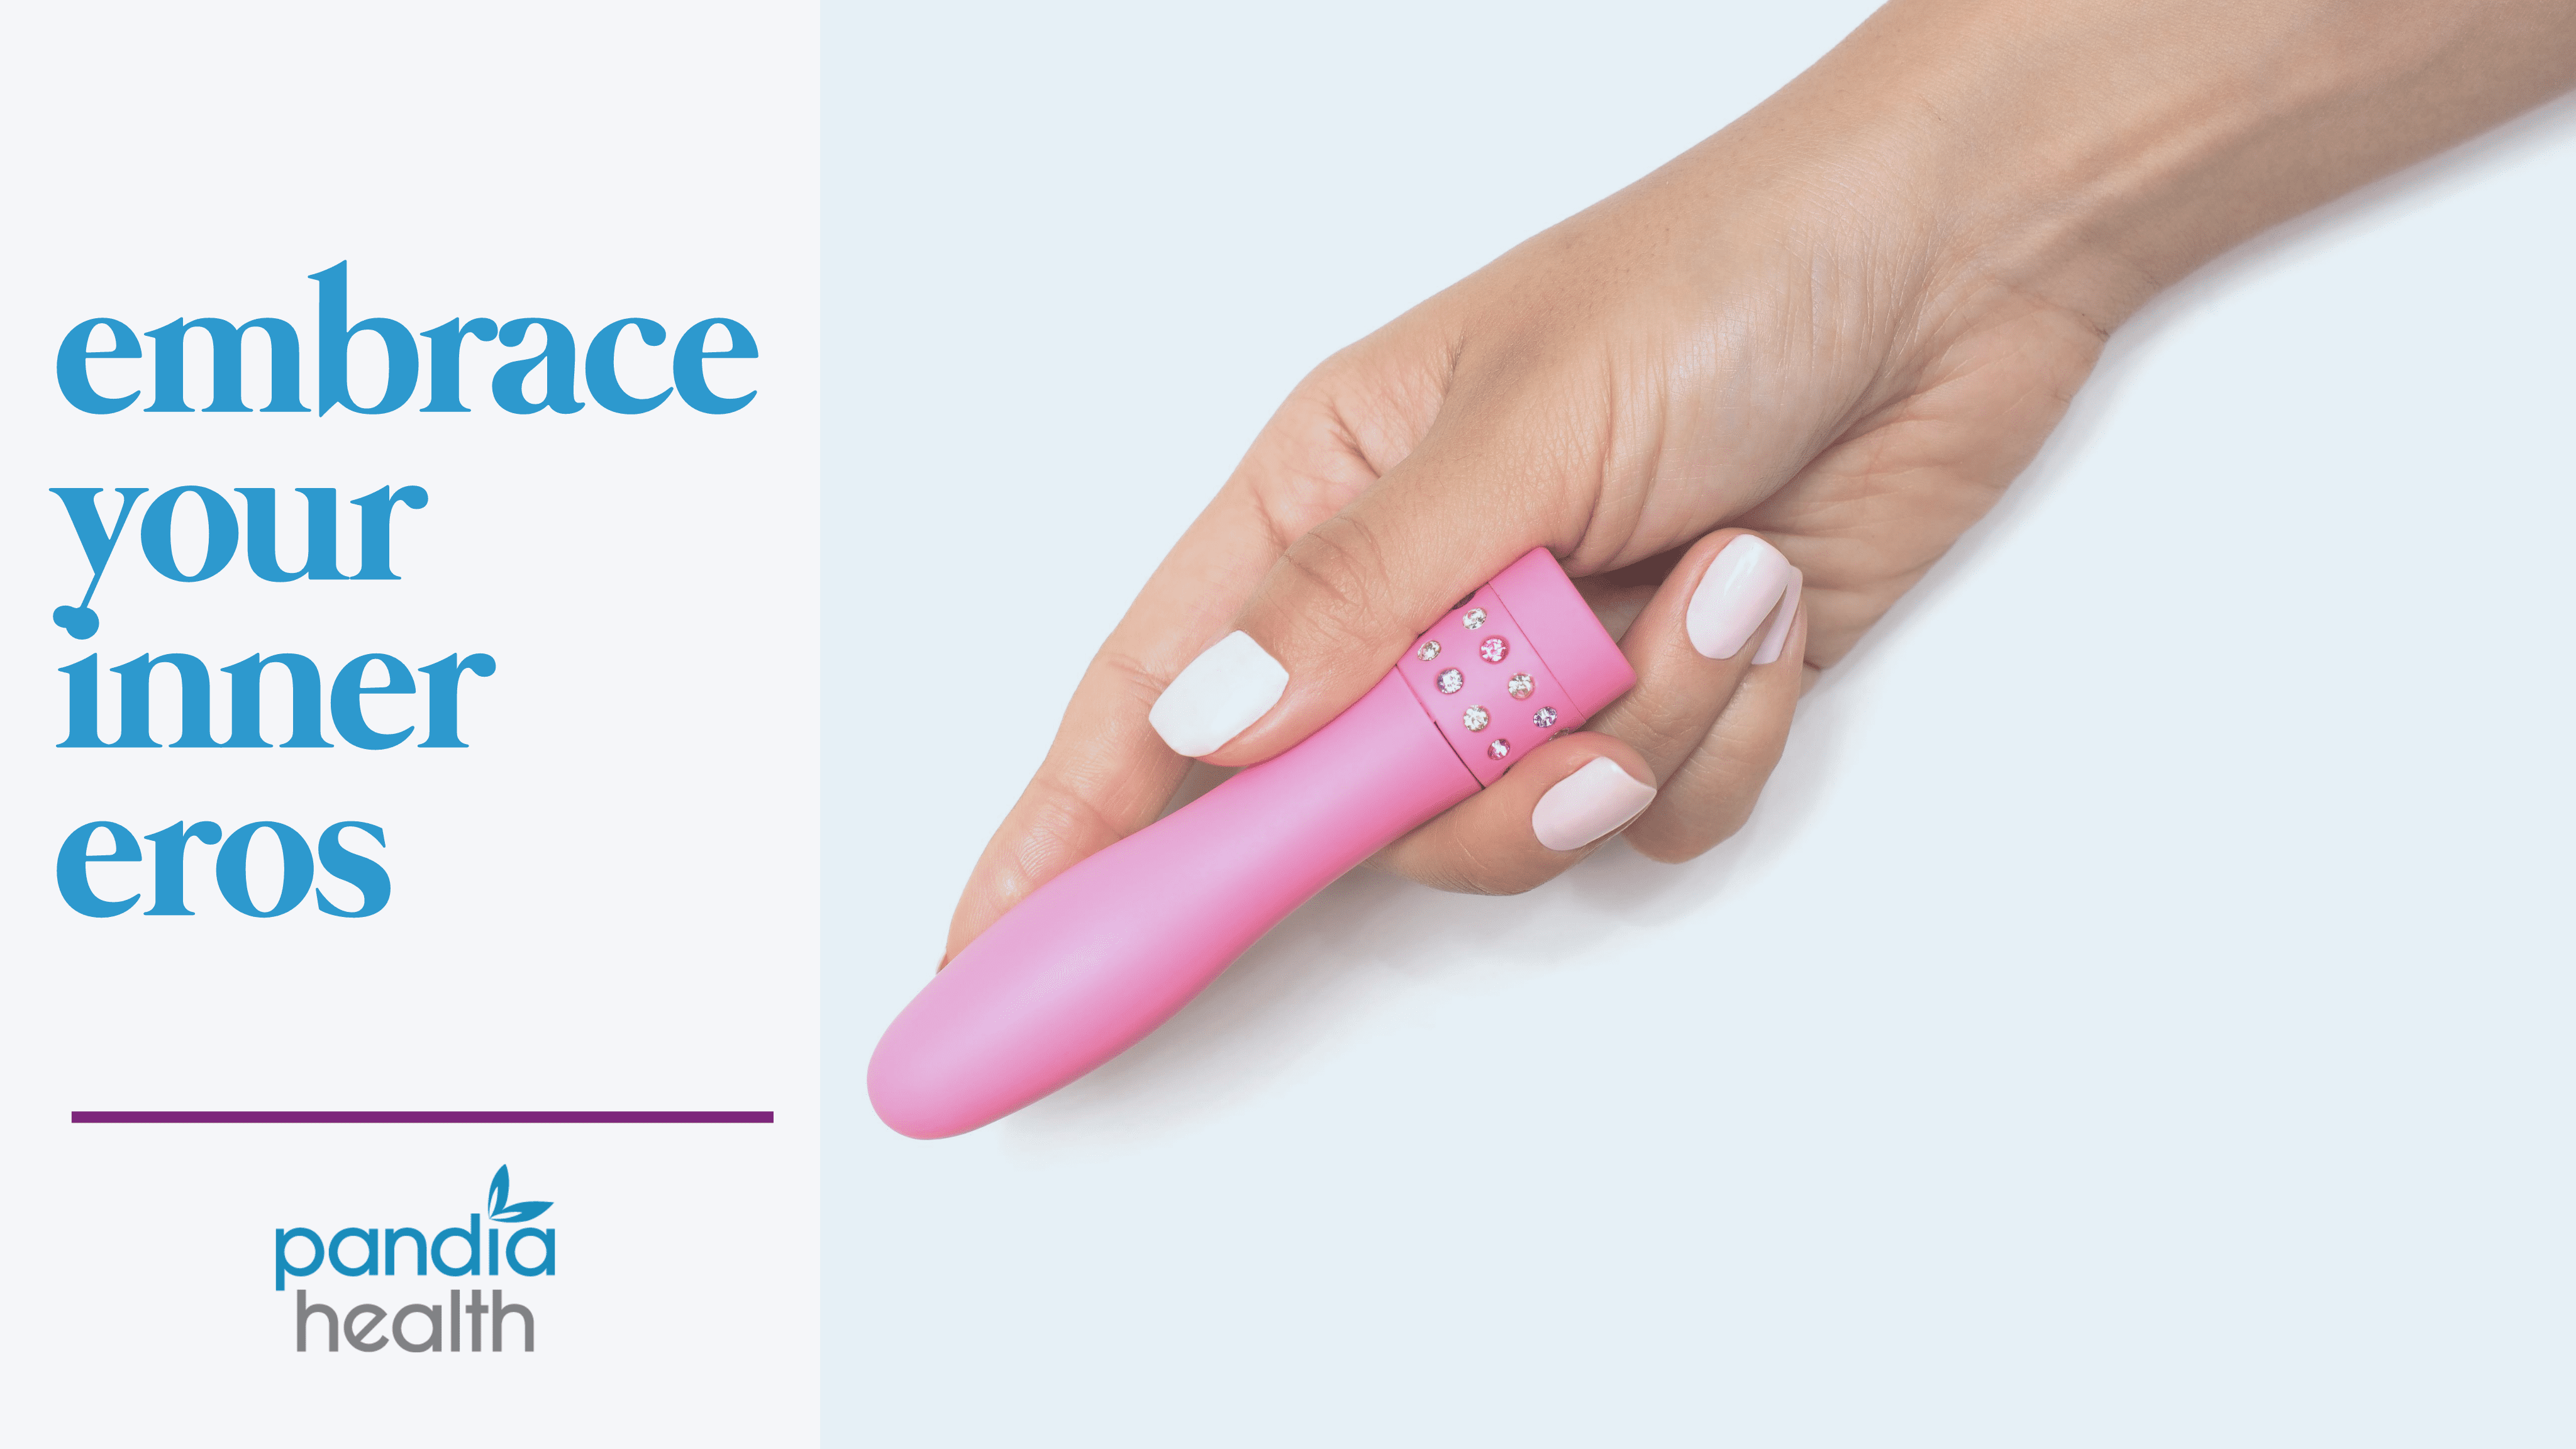 hand holding a small pink vibrator